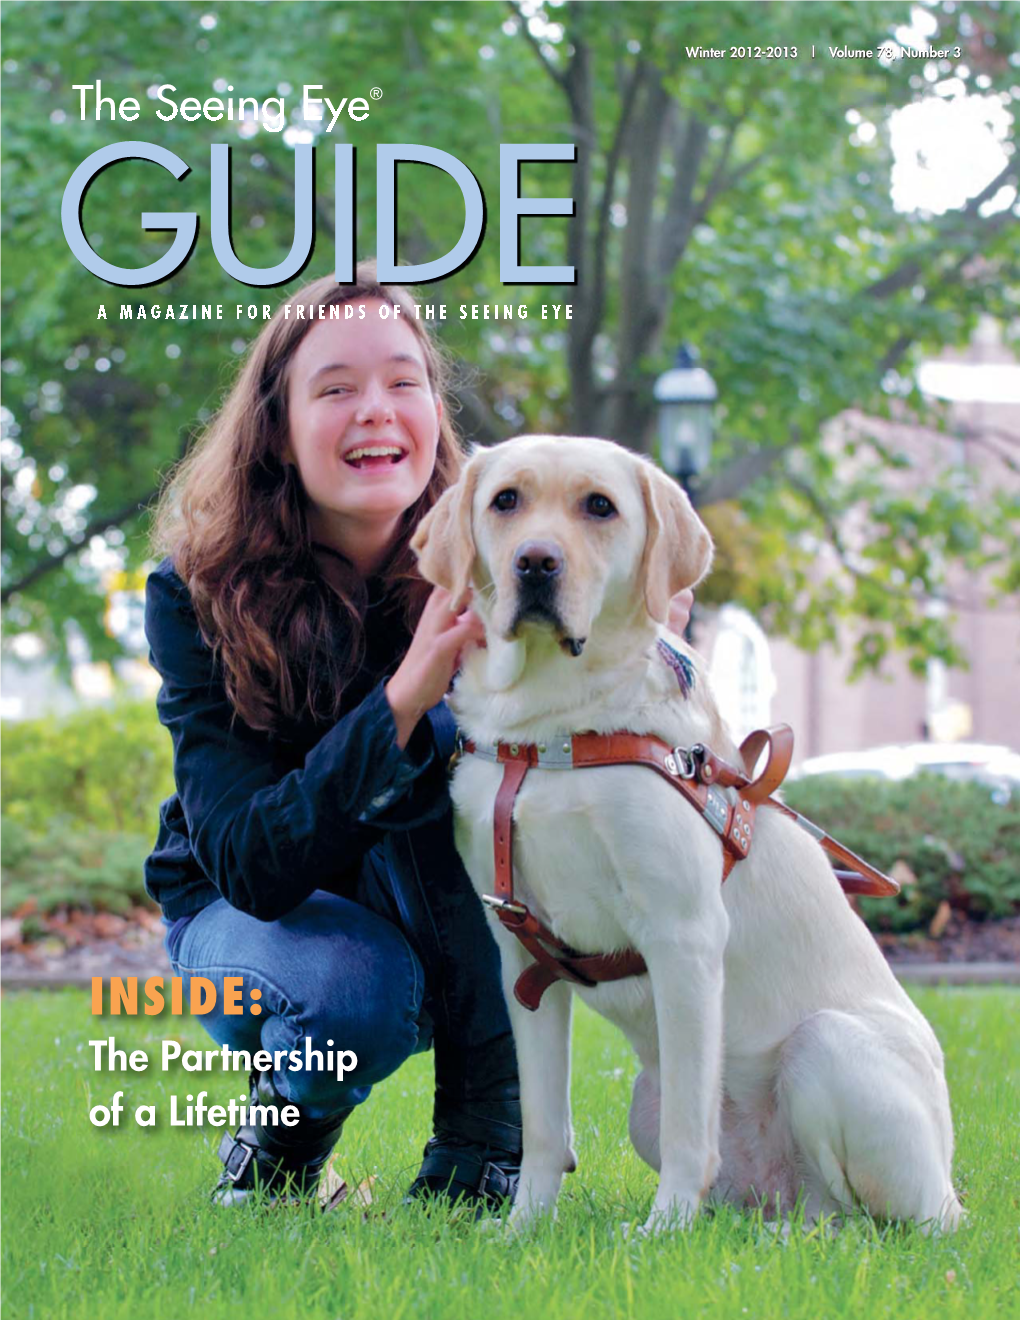 The Guide, Winter 2012-2013